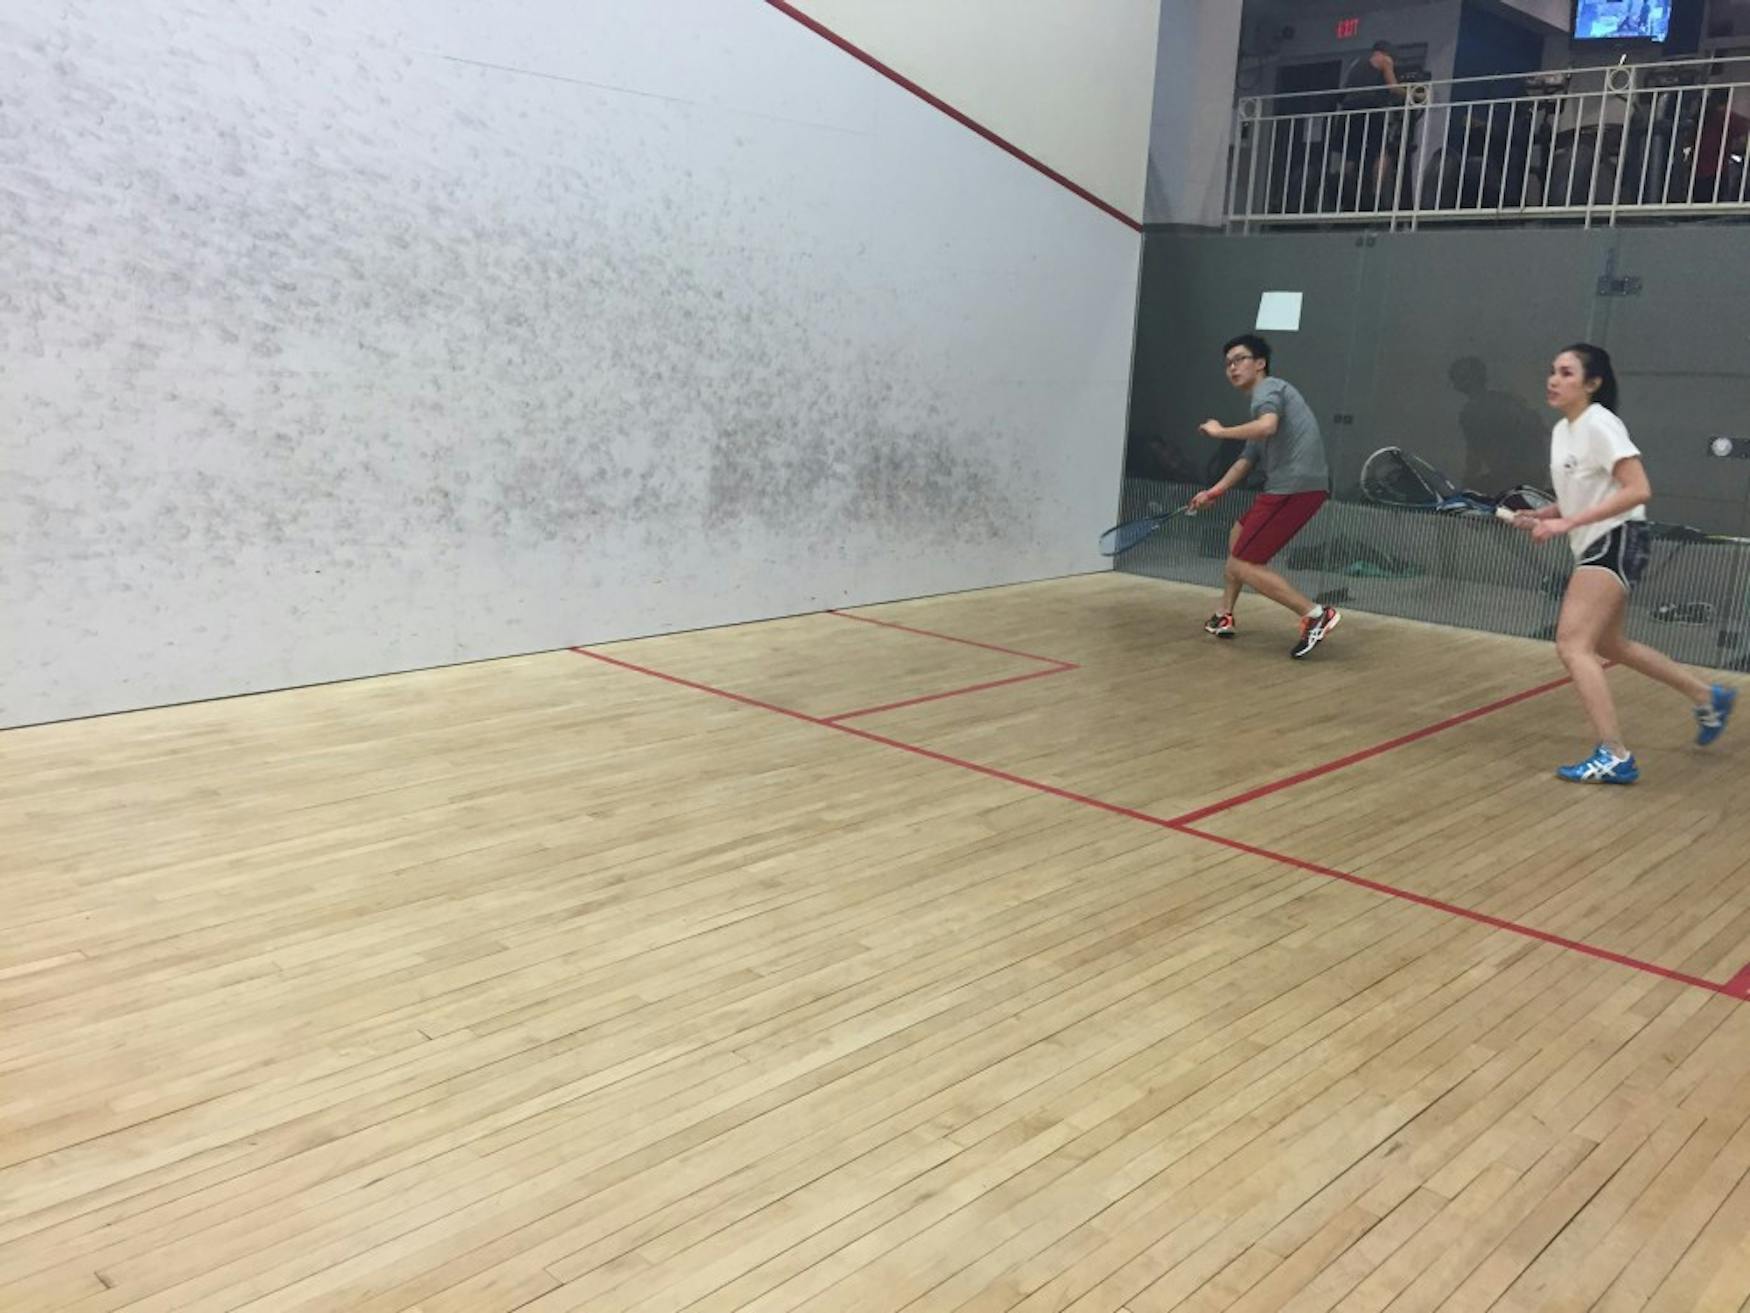 HITTING THE COURTS: Squash players Michael Jiang ’18 (left) and Rie Ota ’18 (right) play during a team practice last month.